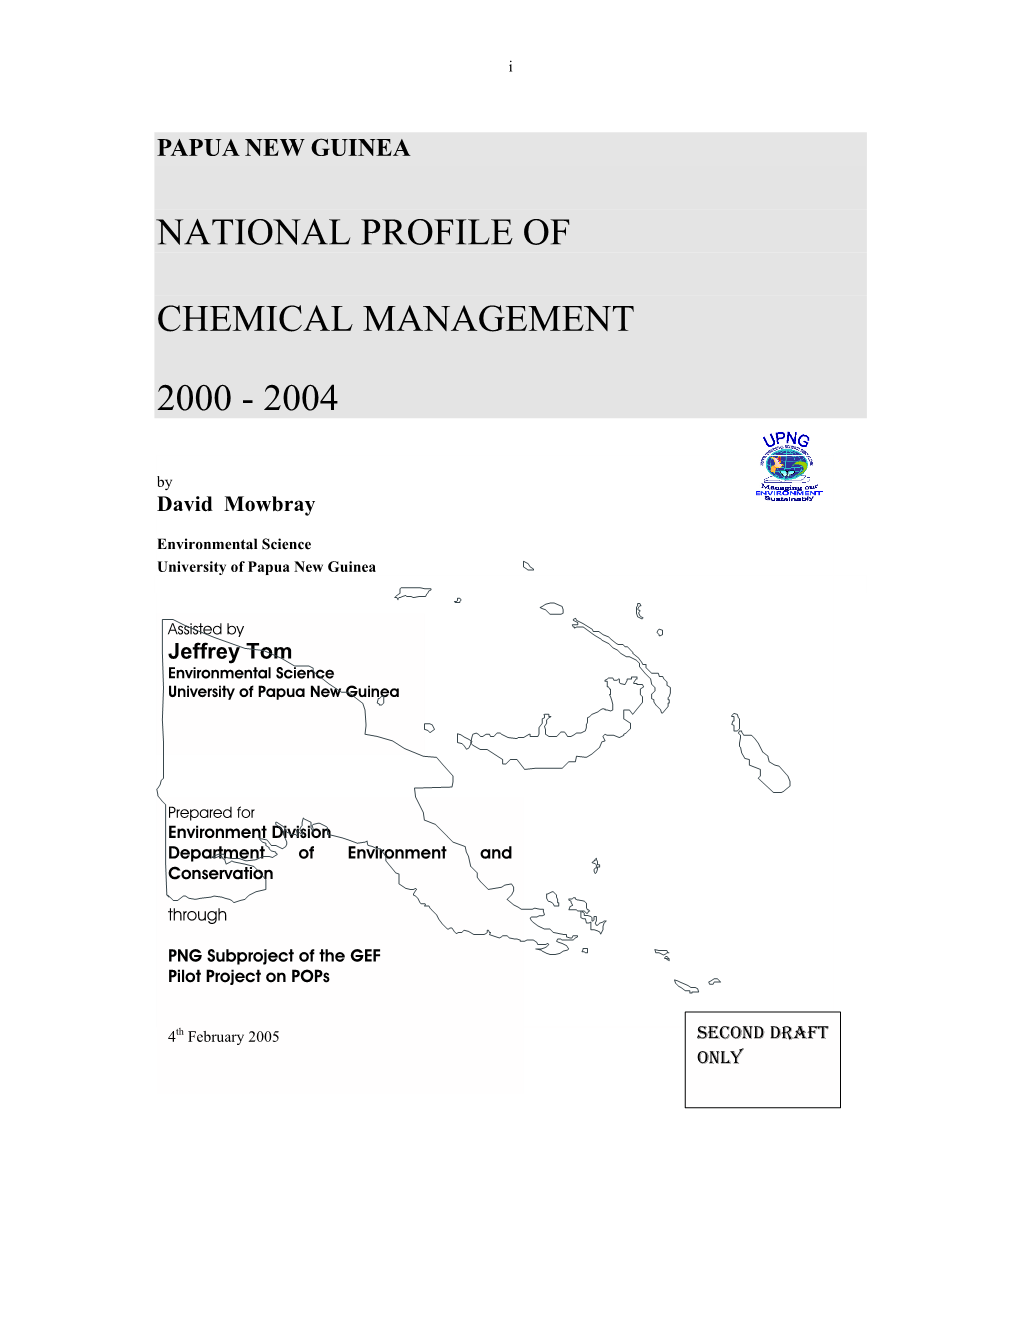 National Profile of Chemical Management 2000 -2004